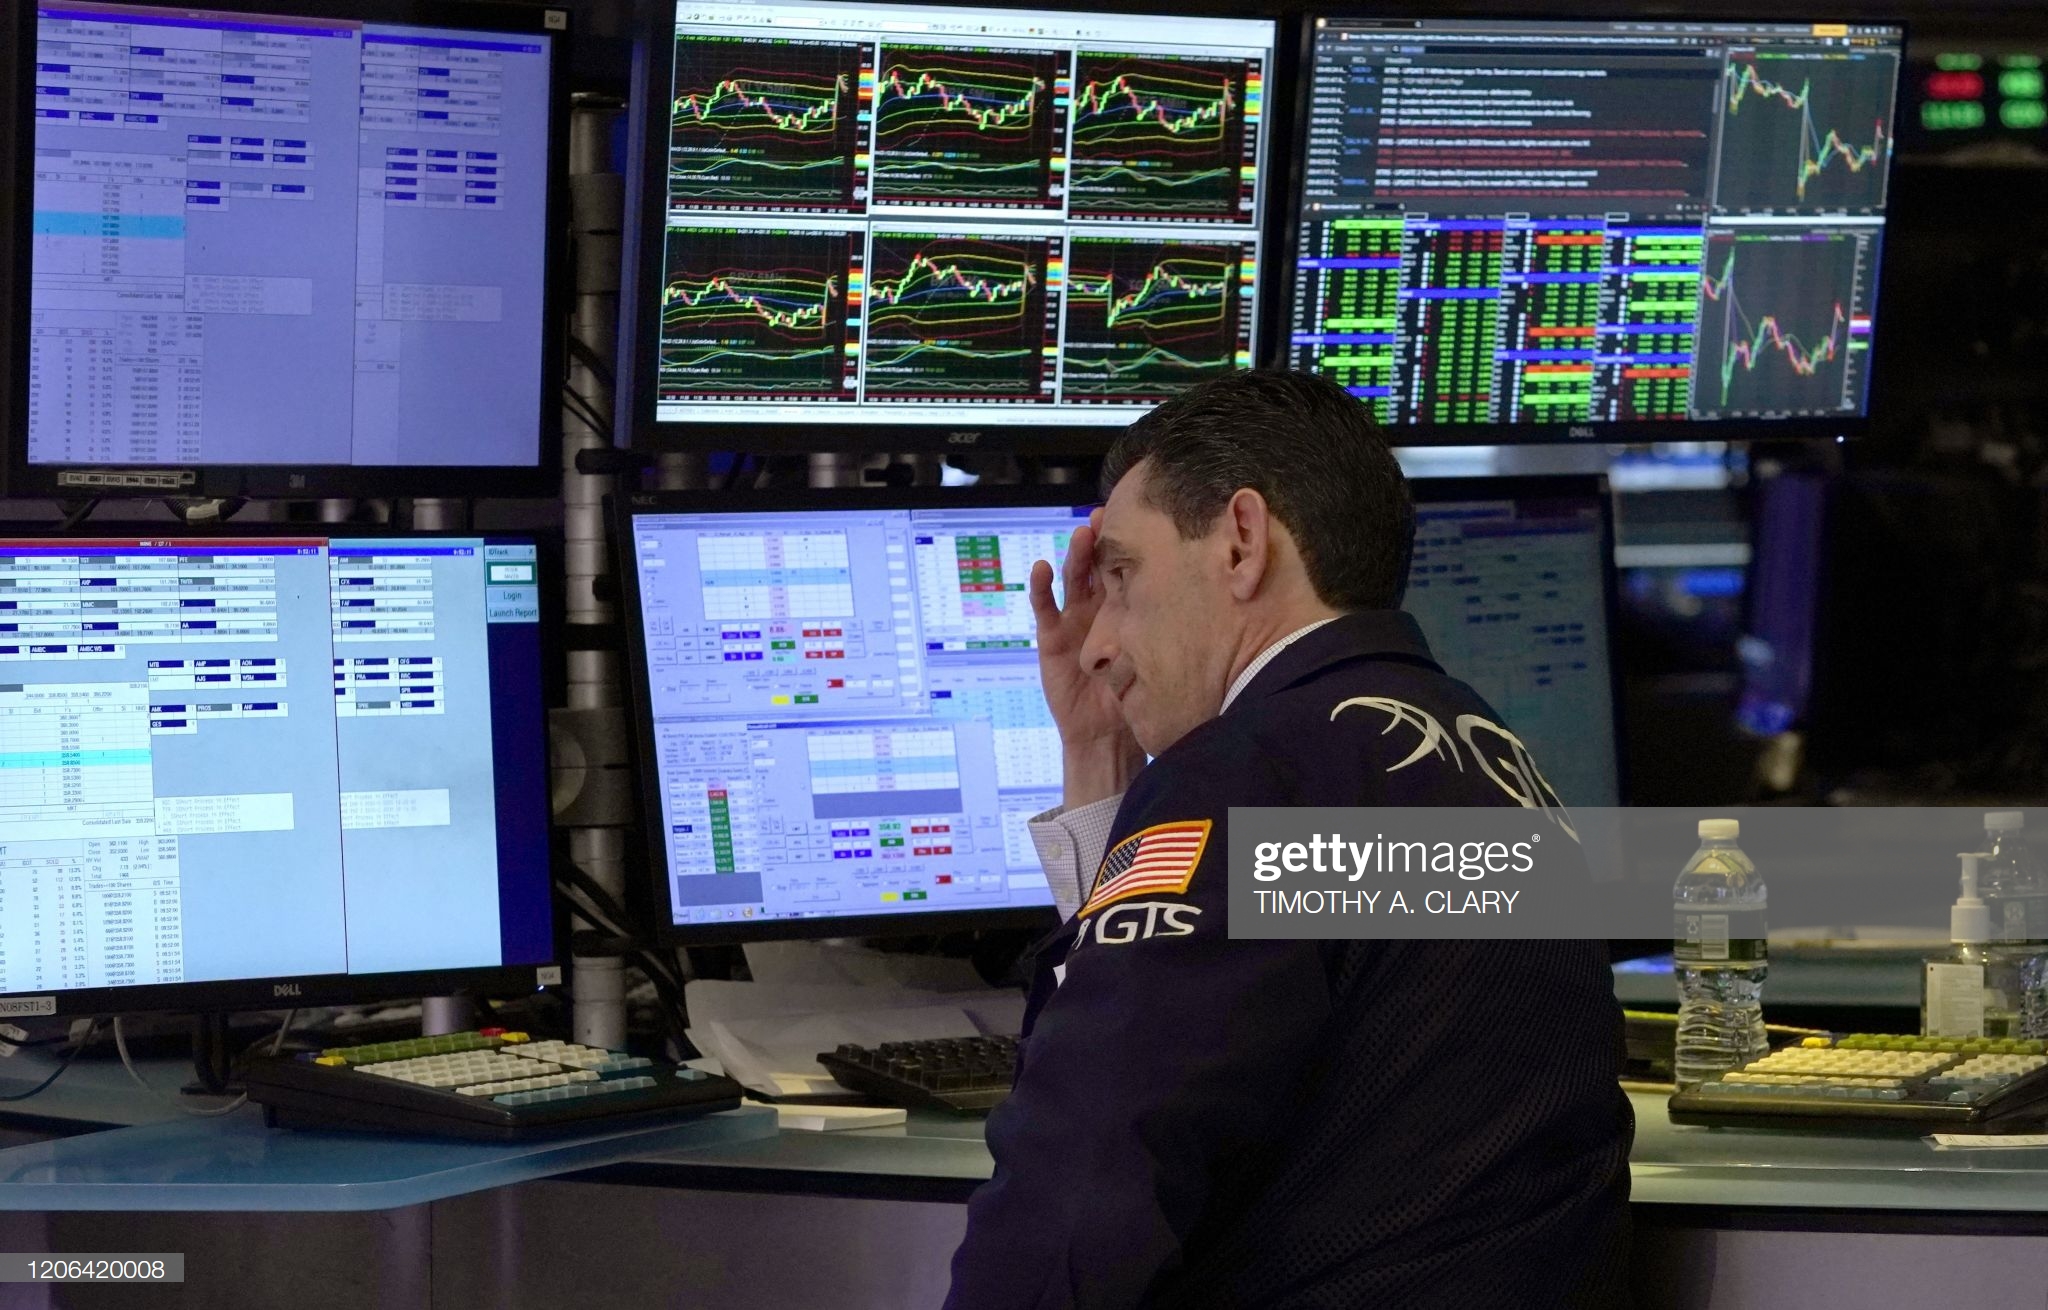 traders-work-on-the-floor-of-the-new-york-stock-exchange-during-the-picture-id1206420008